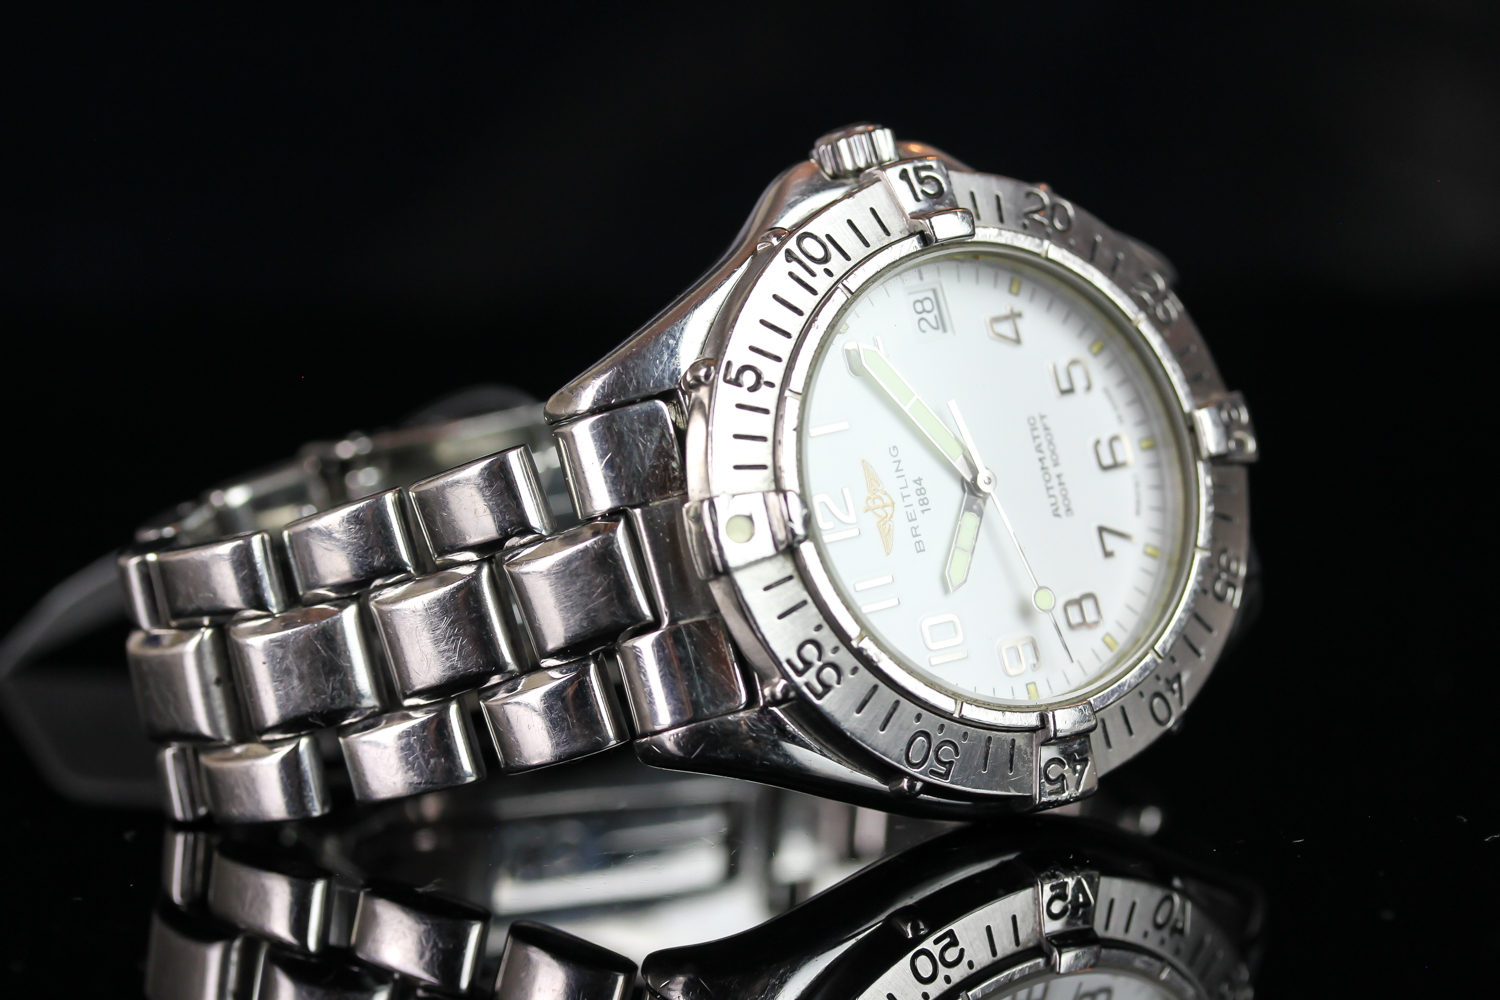 GENTLEMEN'S BREITLING AUTOMATIC DATE WRISTWATCH REF. A17035, circular white dial with a date window, - Image 2 of 3